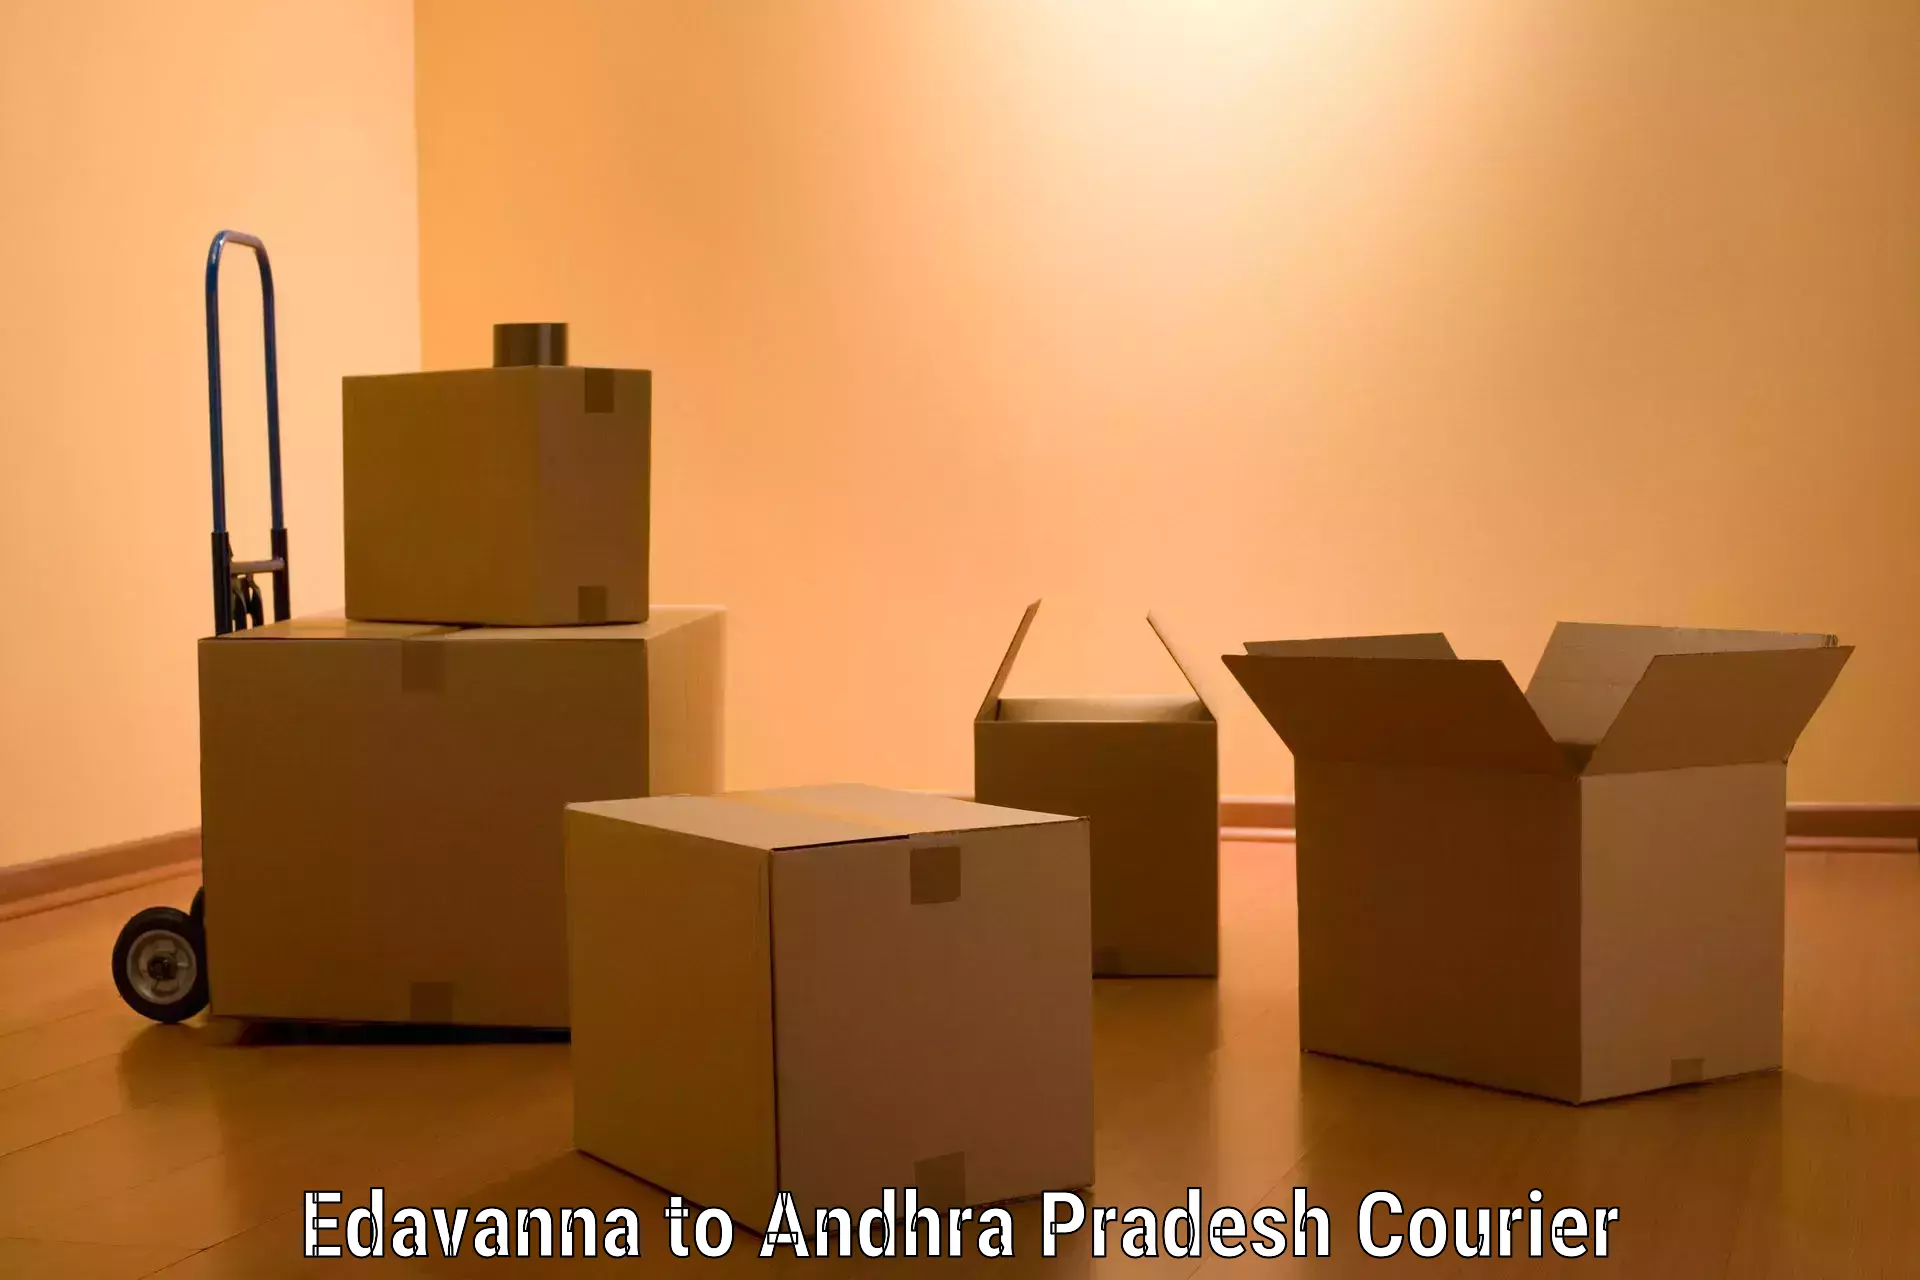 Efficient relocation services in Edavanna to Tripuranthakam